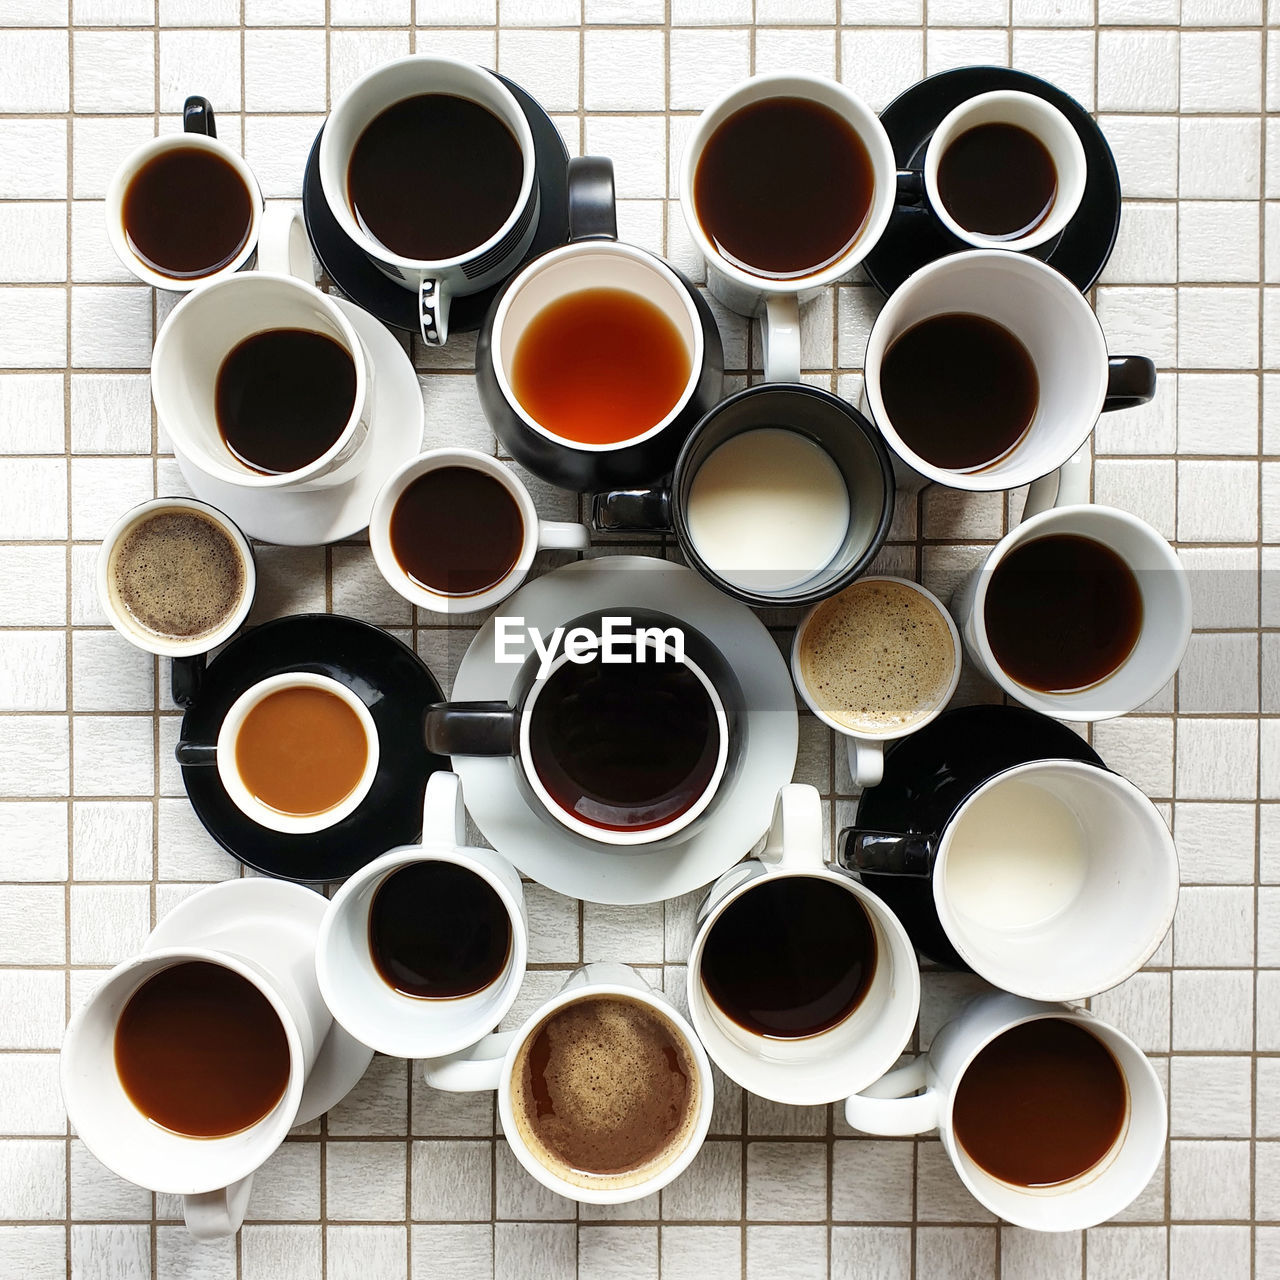 High angle view of multiple collection coffee cups on tiled table